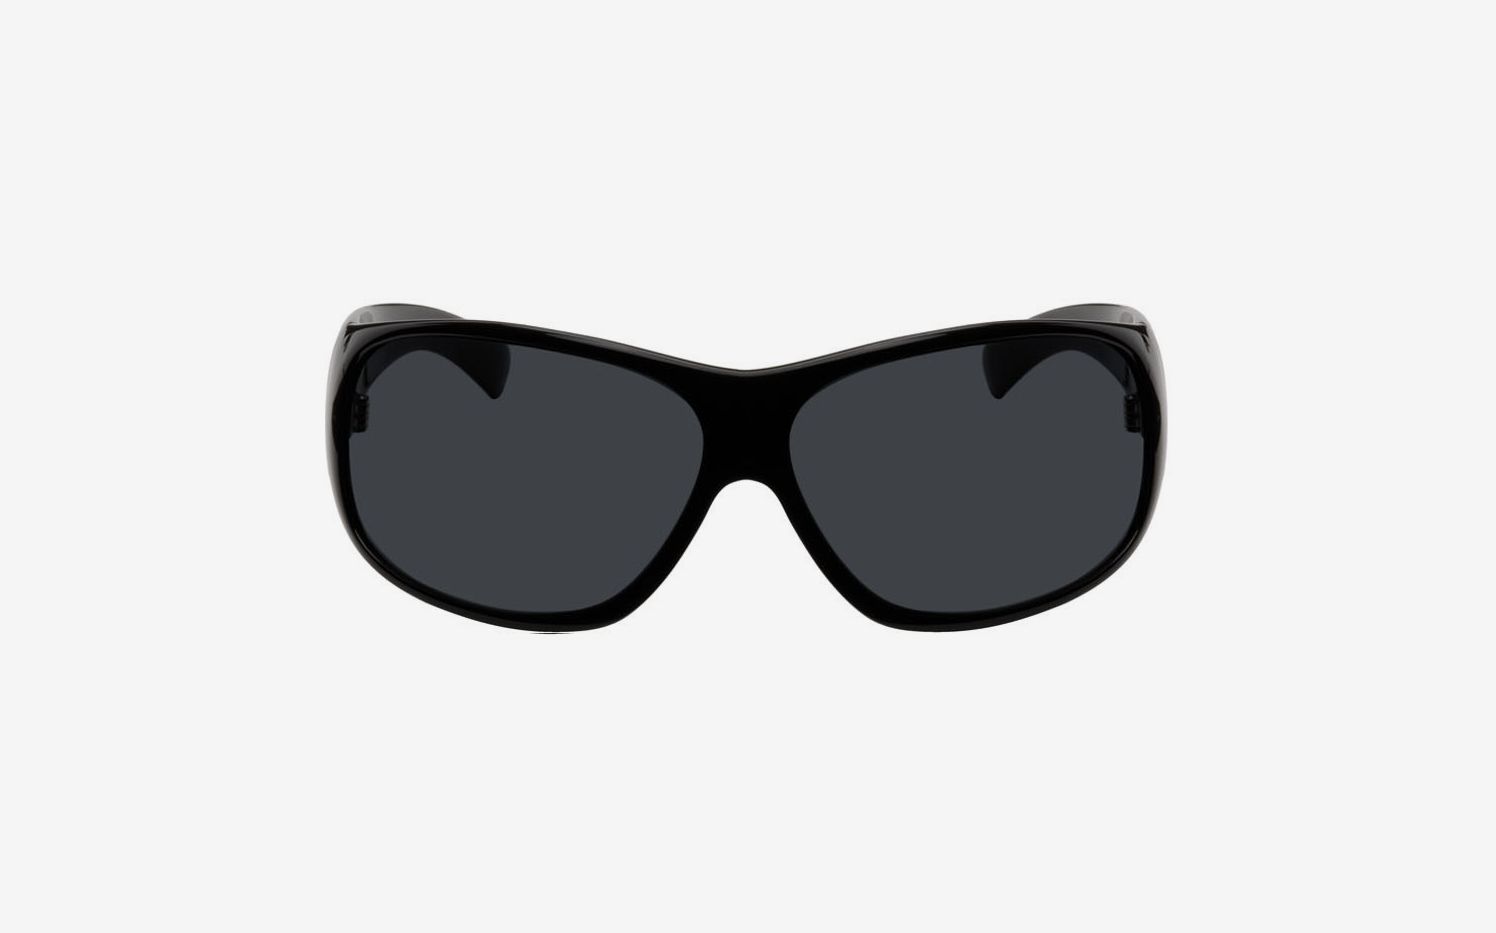 I Keep Seeing This: Gas-Station Sunglasses 2022